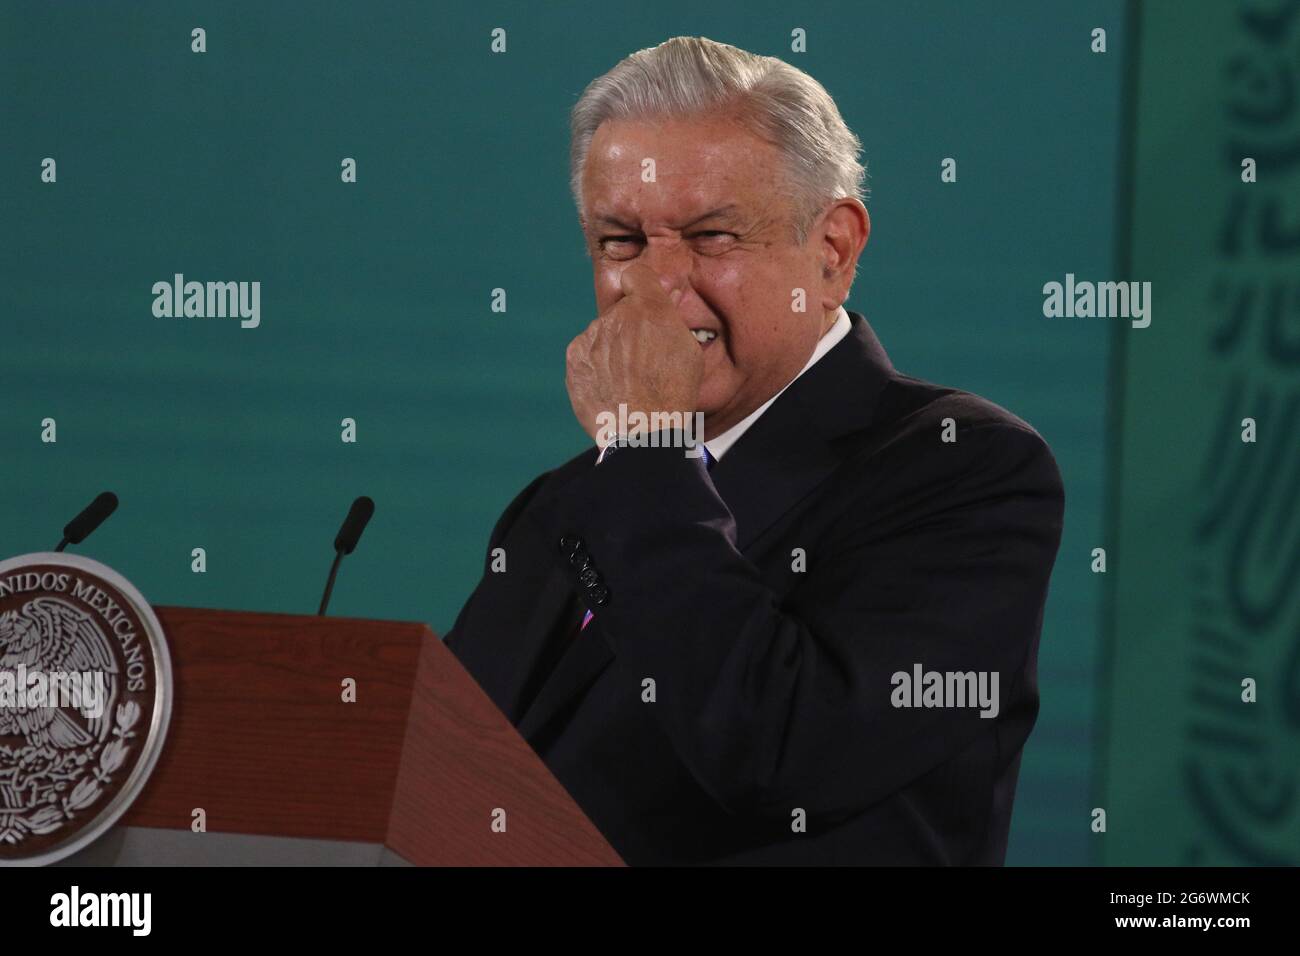 Mexico City, Mexico, July 8, 2021: Mexico’s President Andres Manuel Lopez Obrador gesticulates while offers a speech to media at National Palace. Credit: Ismael Rosas/Eyepix Group/Alamy Live News Stock Photo